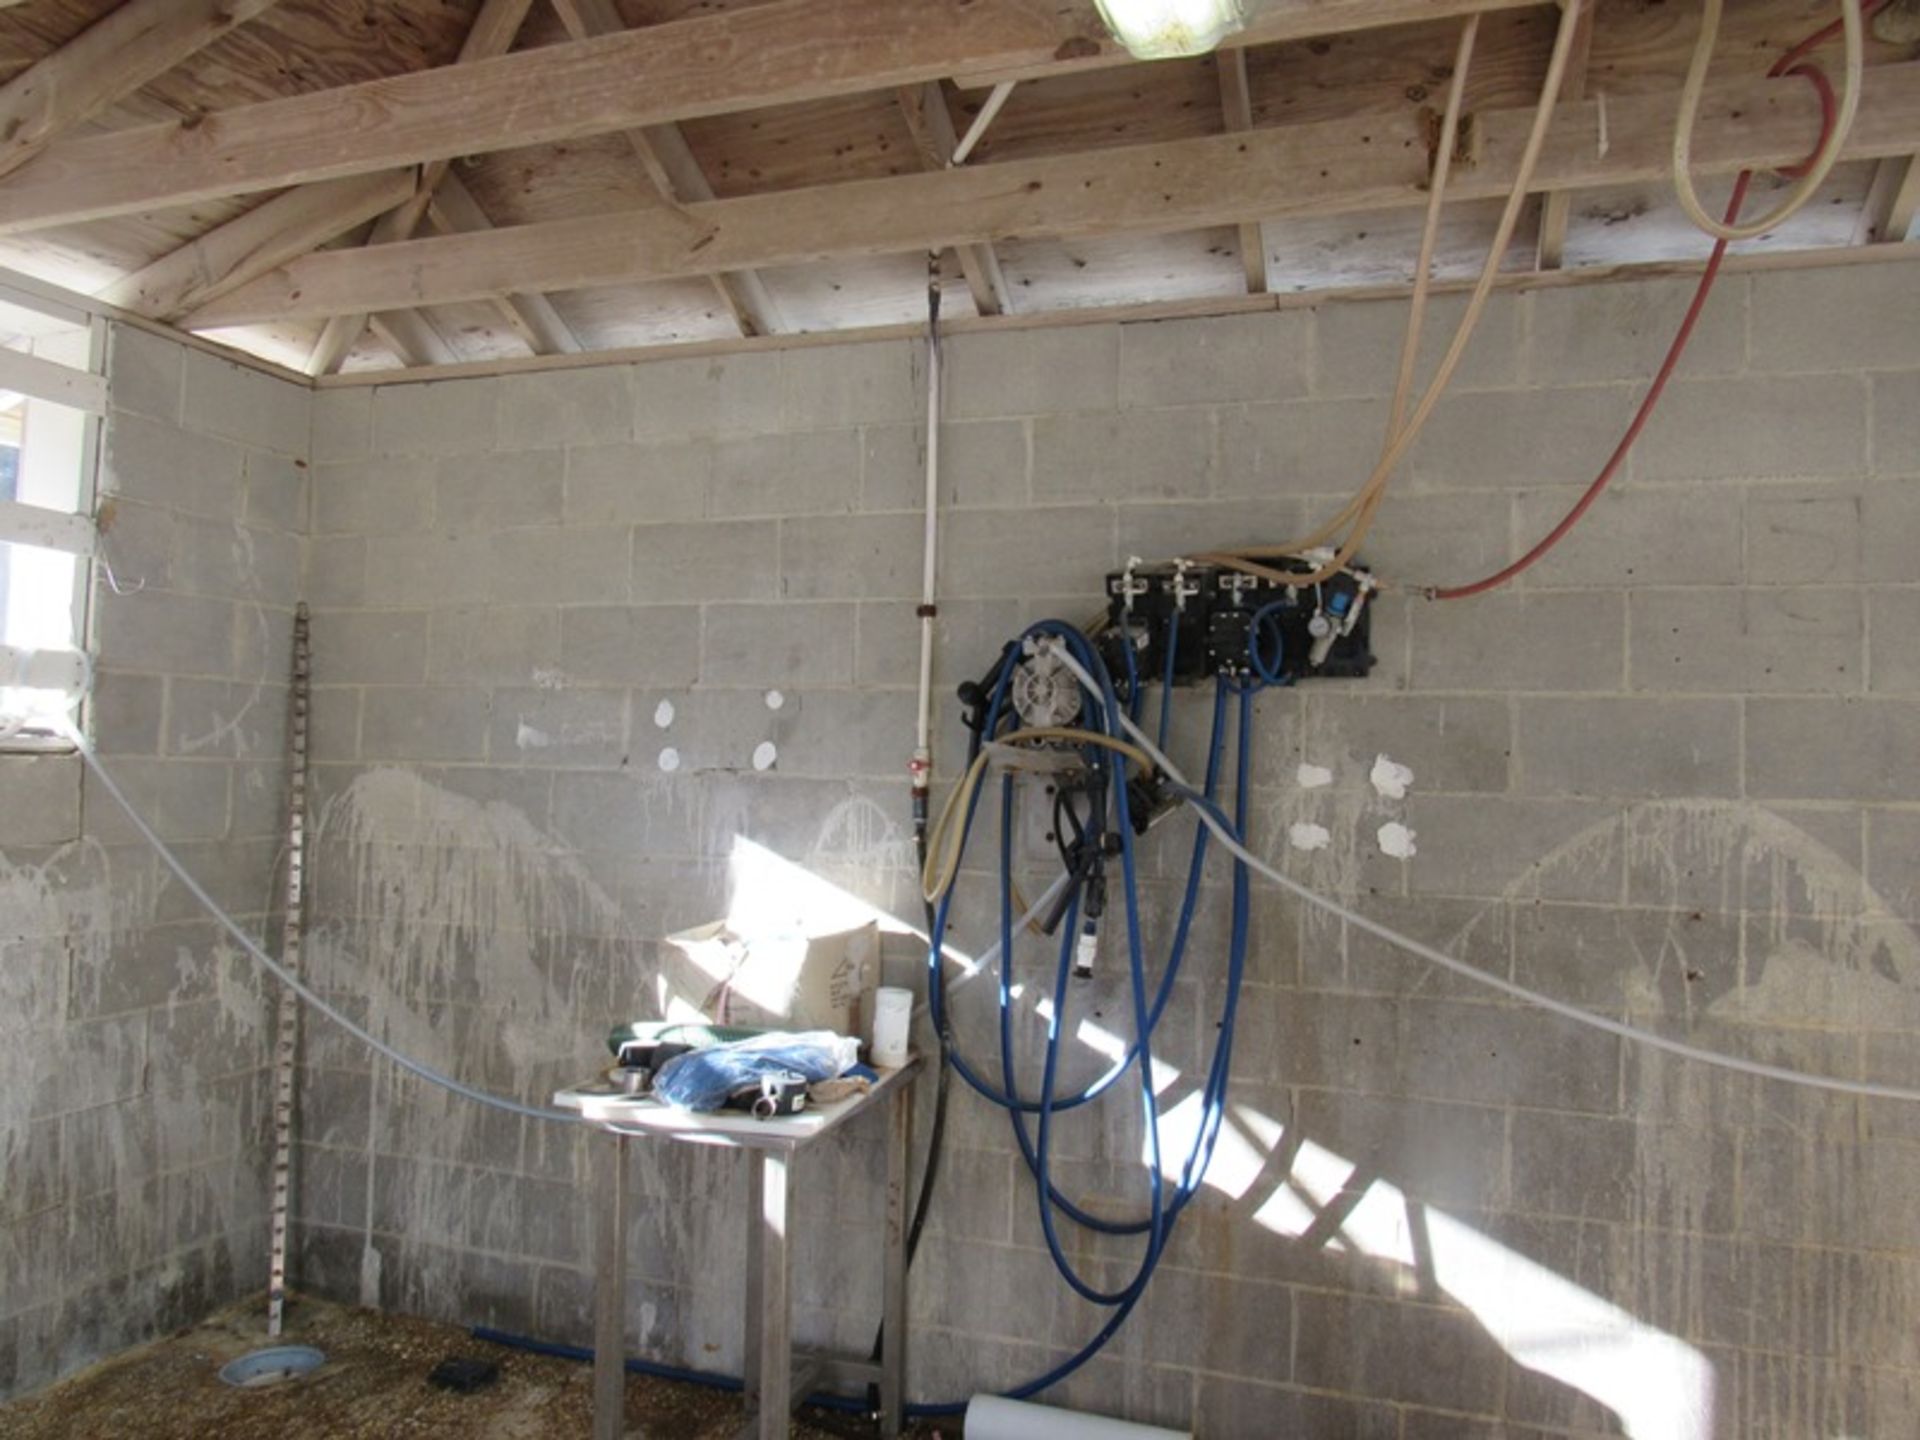 Lot Compressor Room Contents: Desk, Chairs, Hose, Sprayers, Bump Caps, Boots, Stainless Steel - Image 9 of 10